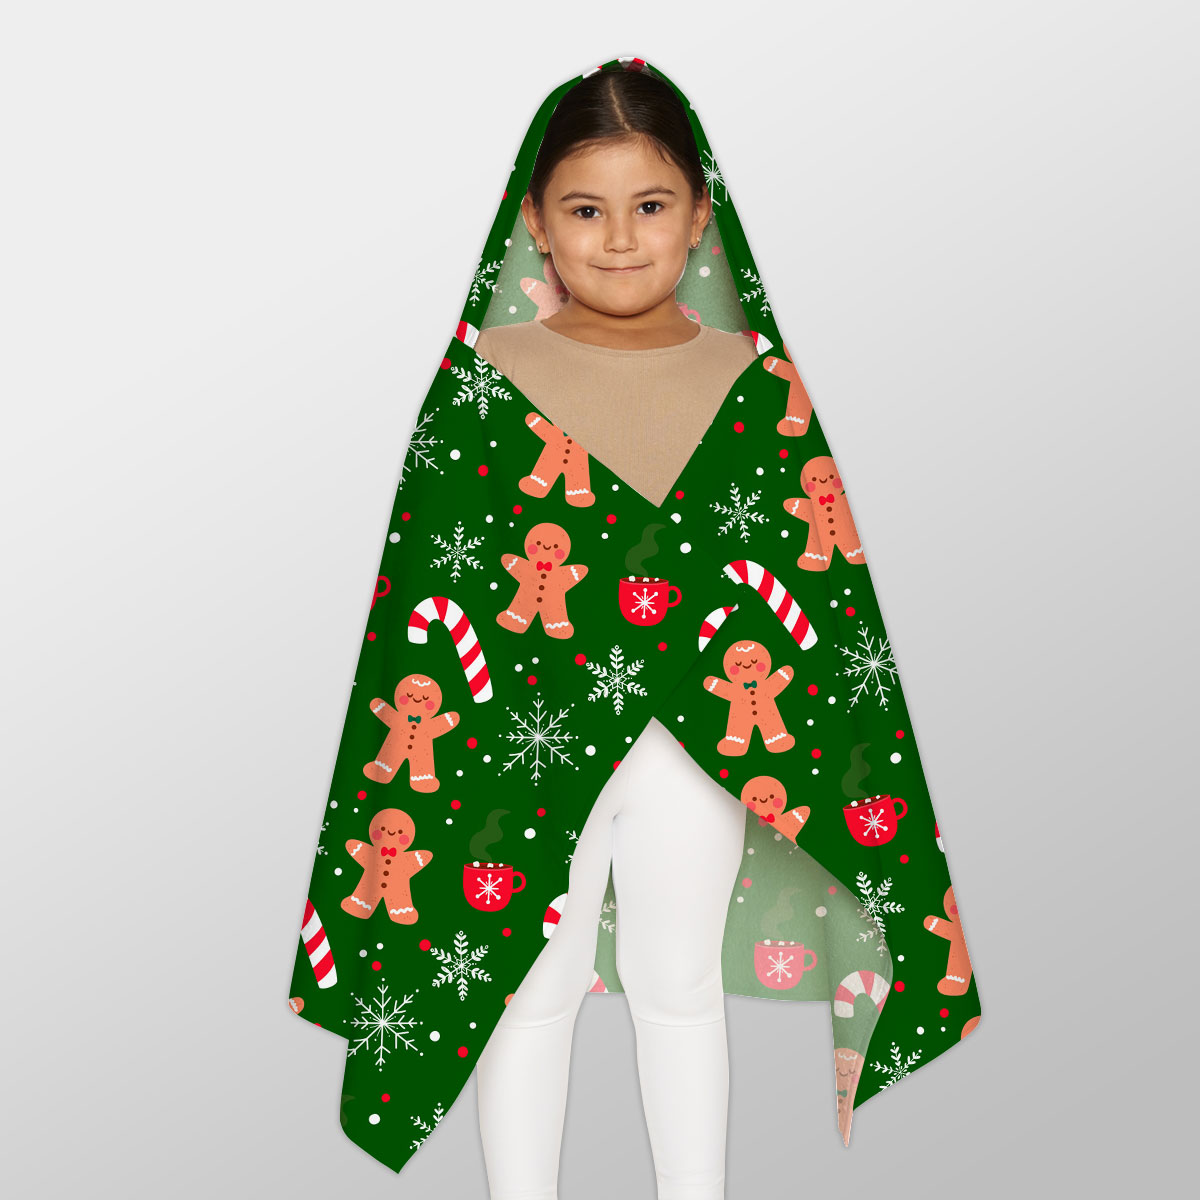 Red Green And White Gingerbread Man, Candy Cane With Snowflake Youth Hooded Towel